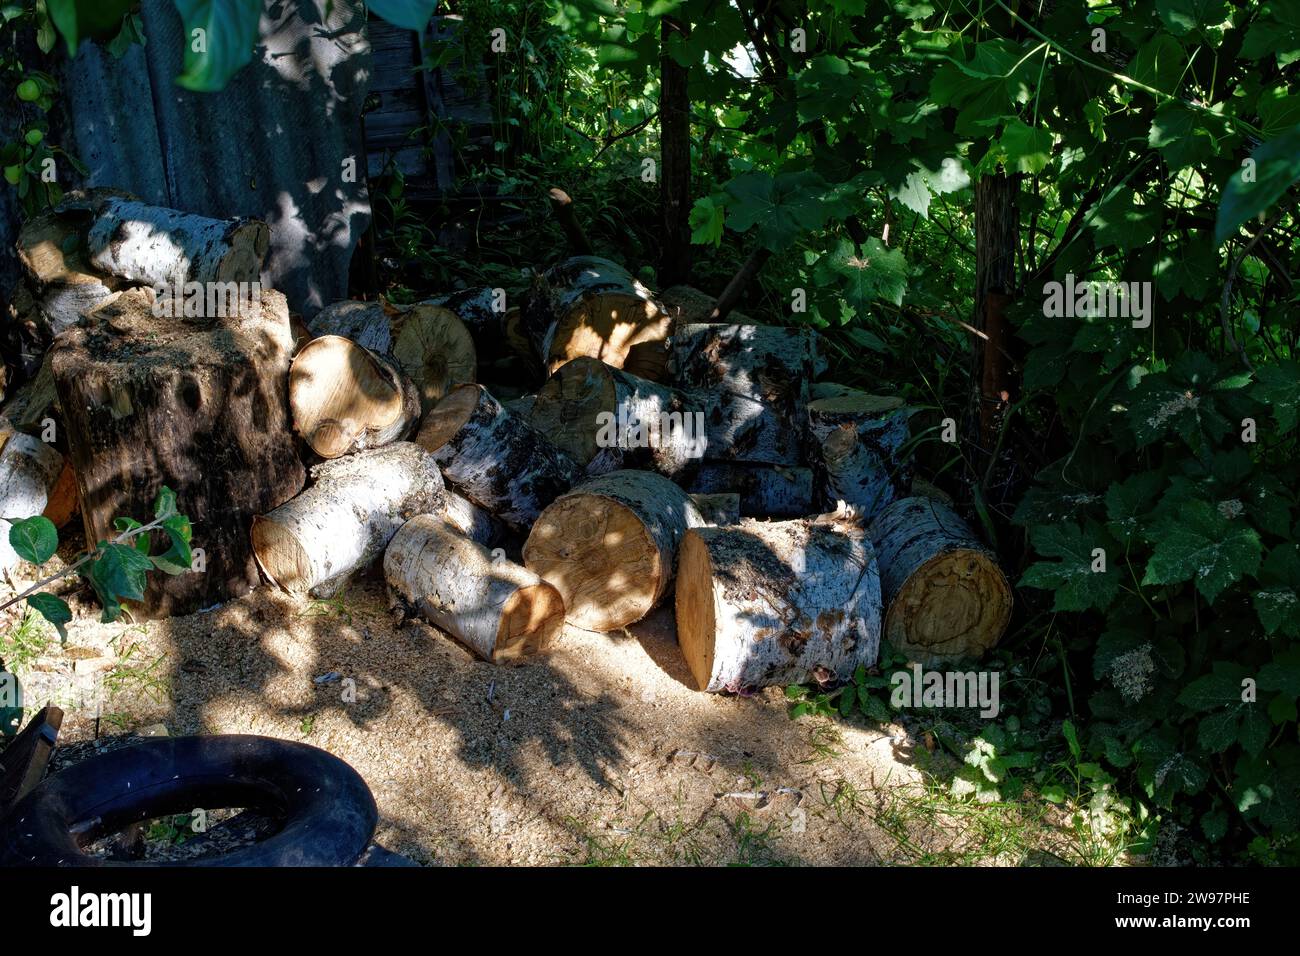 Pile of firewood in the garden in summer, Russia Stock Photo